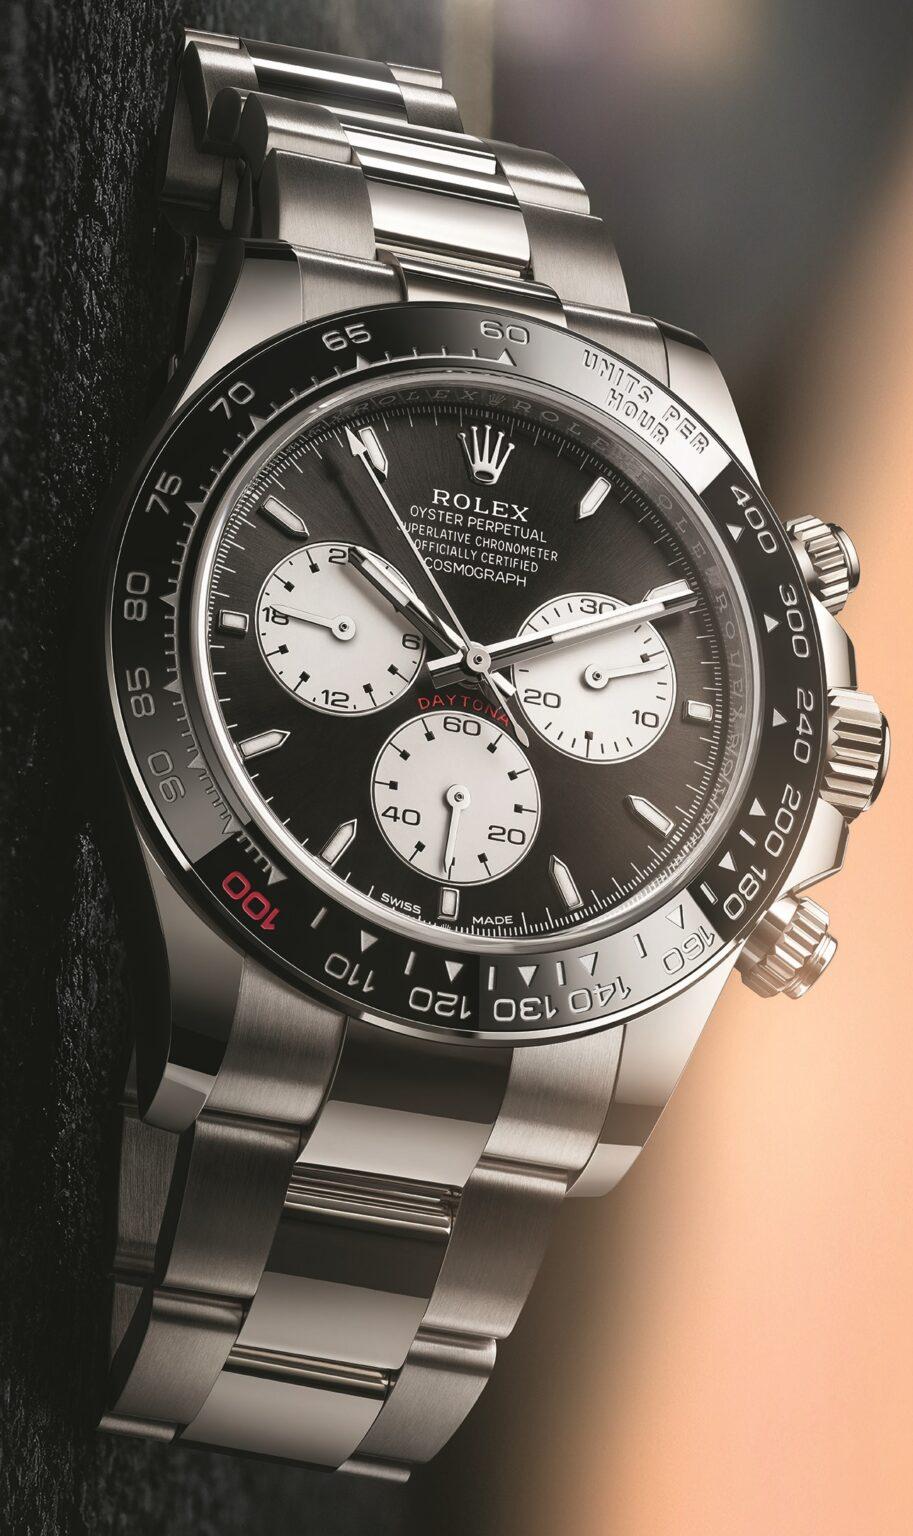 Rolex Waiting List: What is the Rolex Waitlist, How Does it Work?